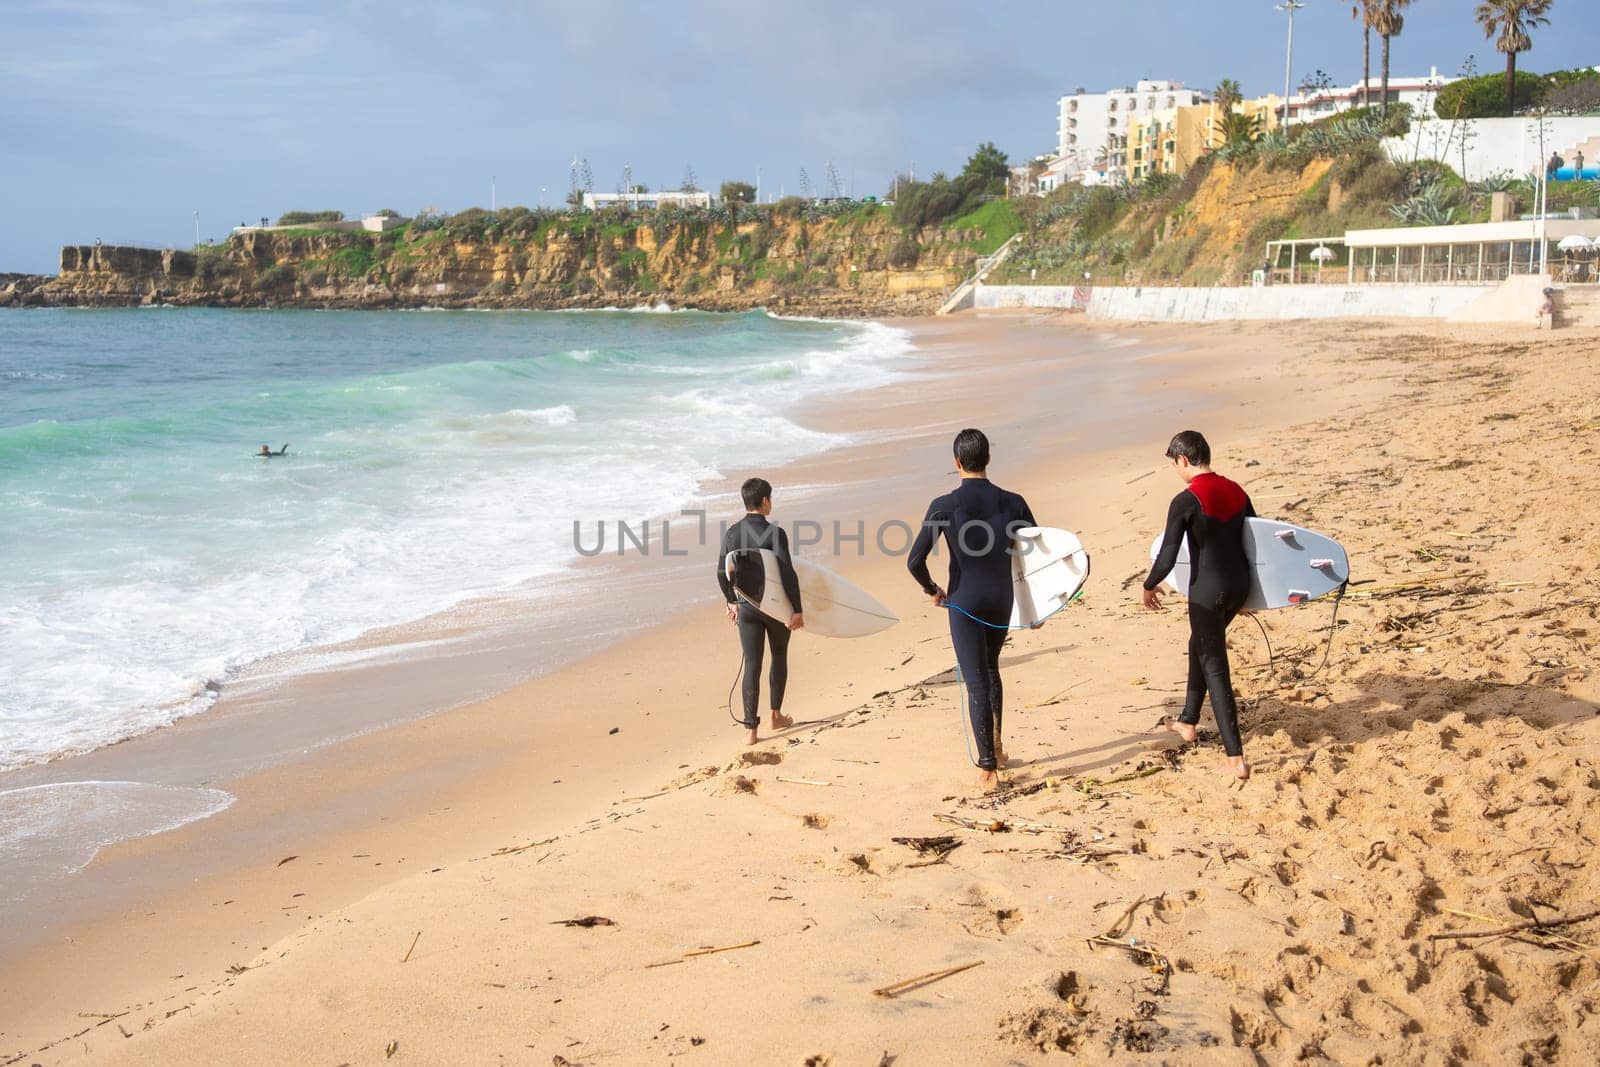 Back view of anonymous surfers walking with surfboards along sea waves. Full body of active friends in swimwear walking on sandy beach. Summer vacation and water sport concepts.